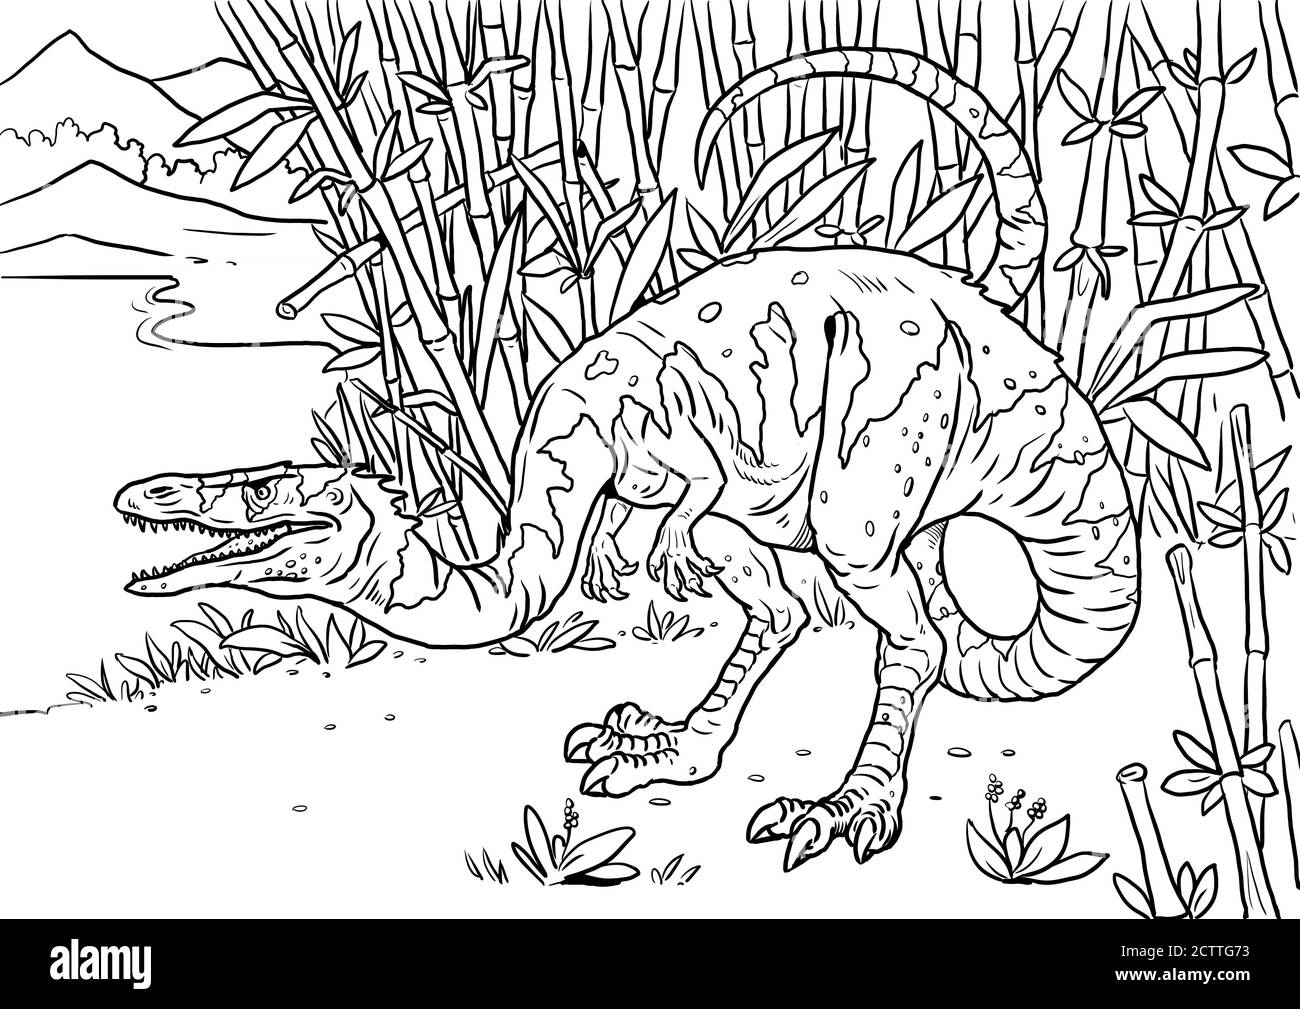 Small predatory dinosaur - Coelophysis. Dino isolated drawing. Coloring book template. Stock Photo